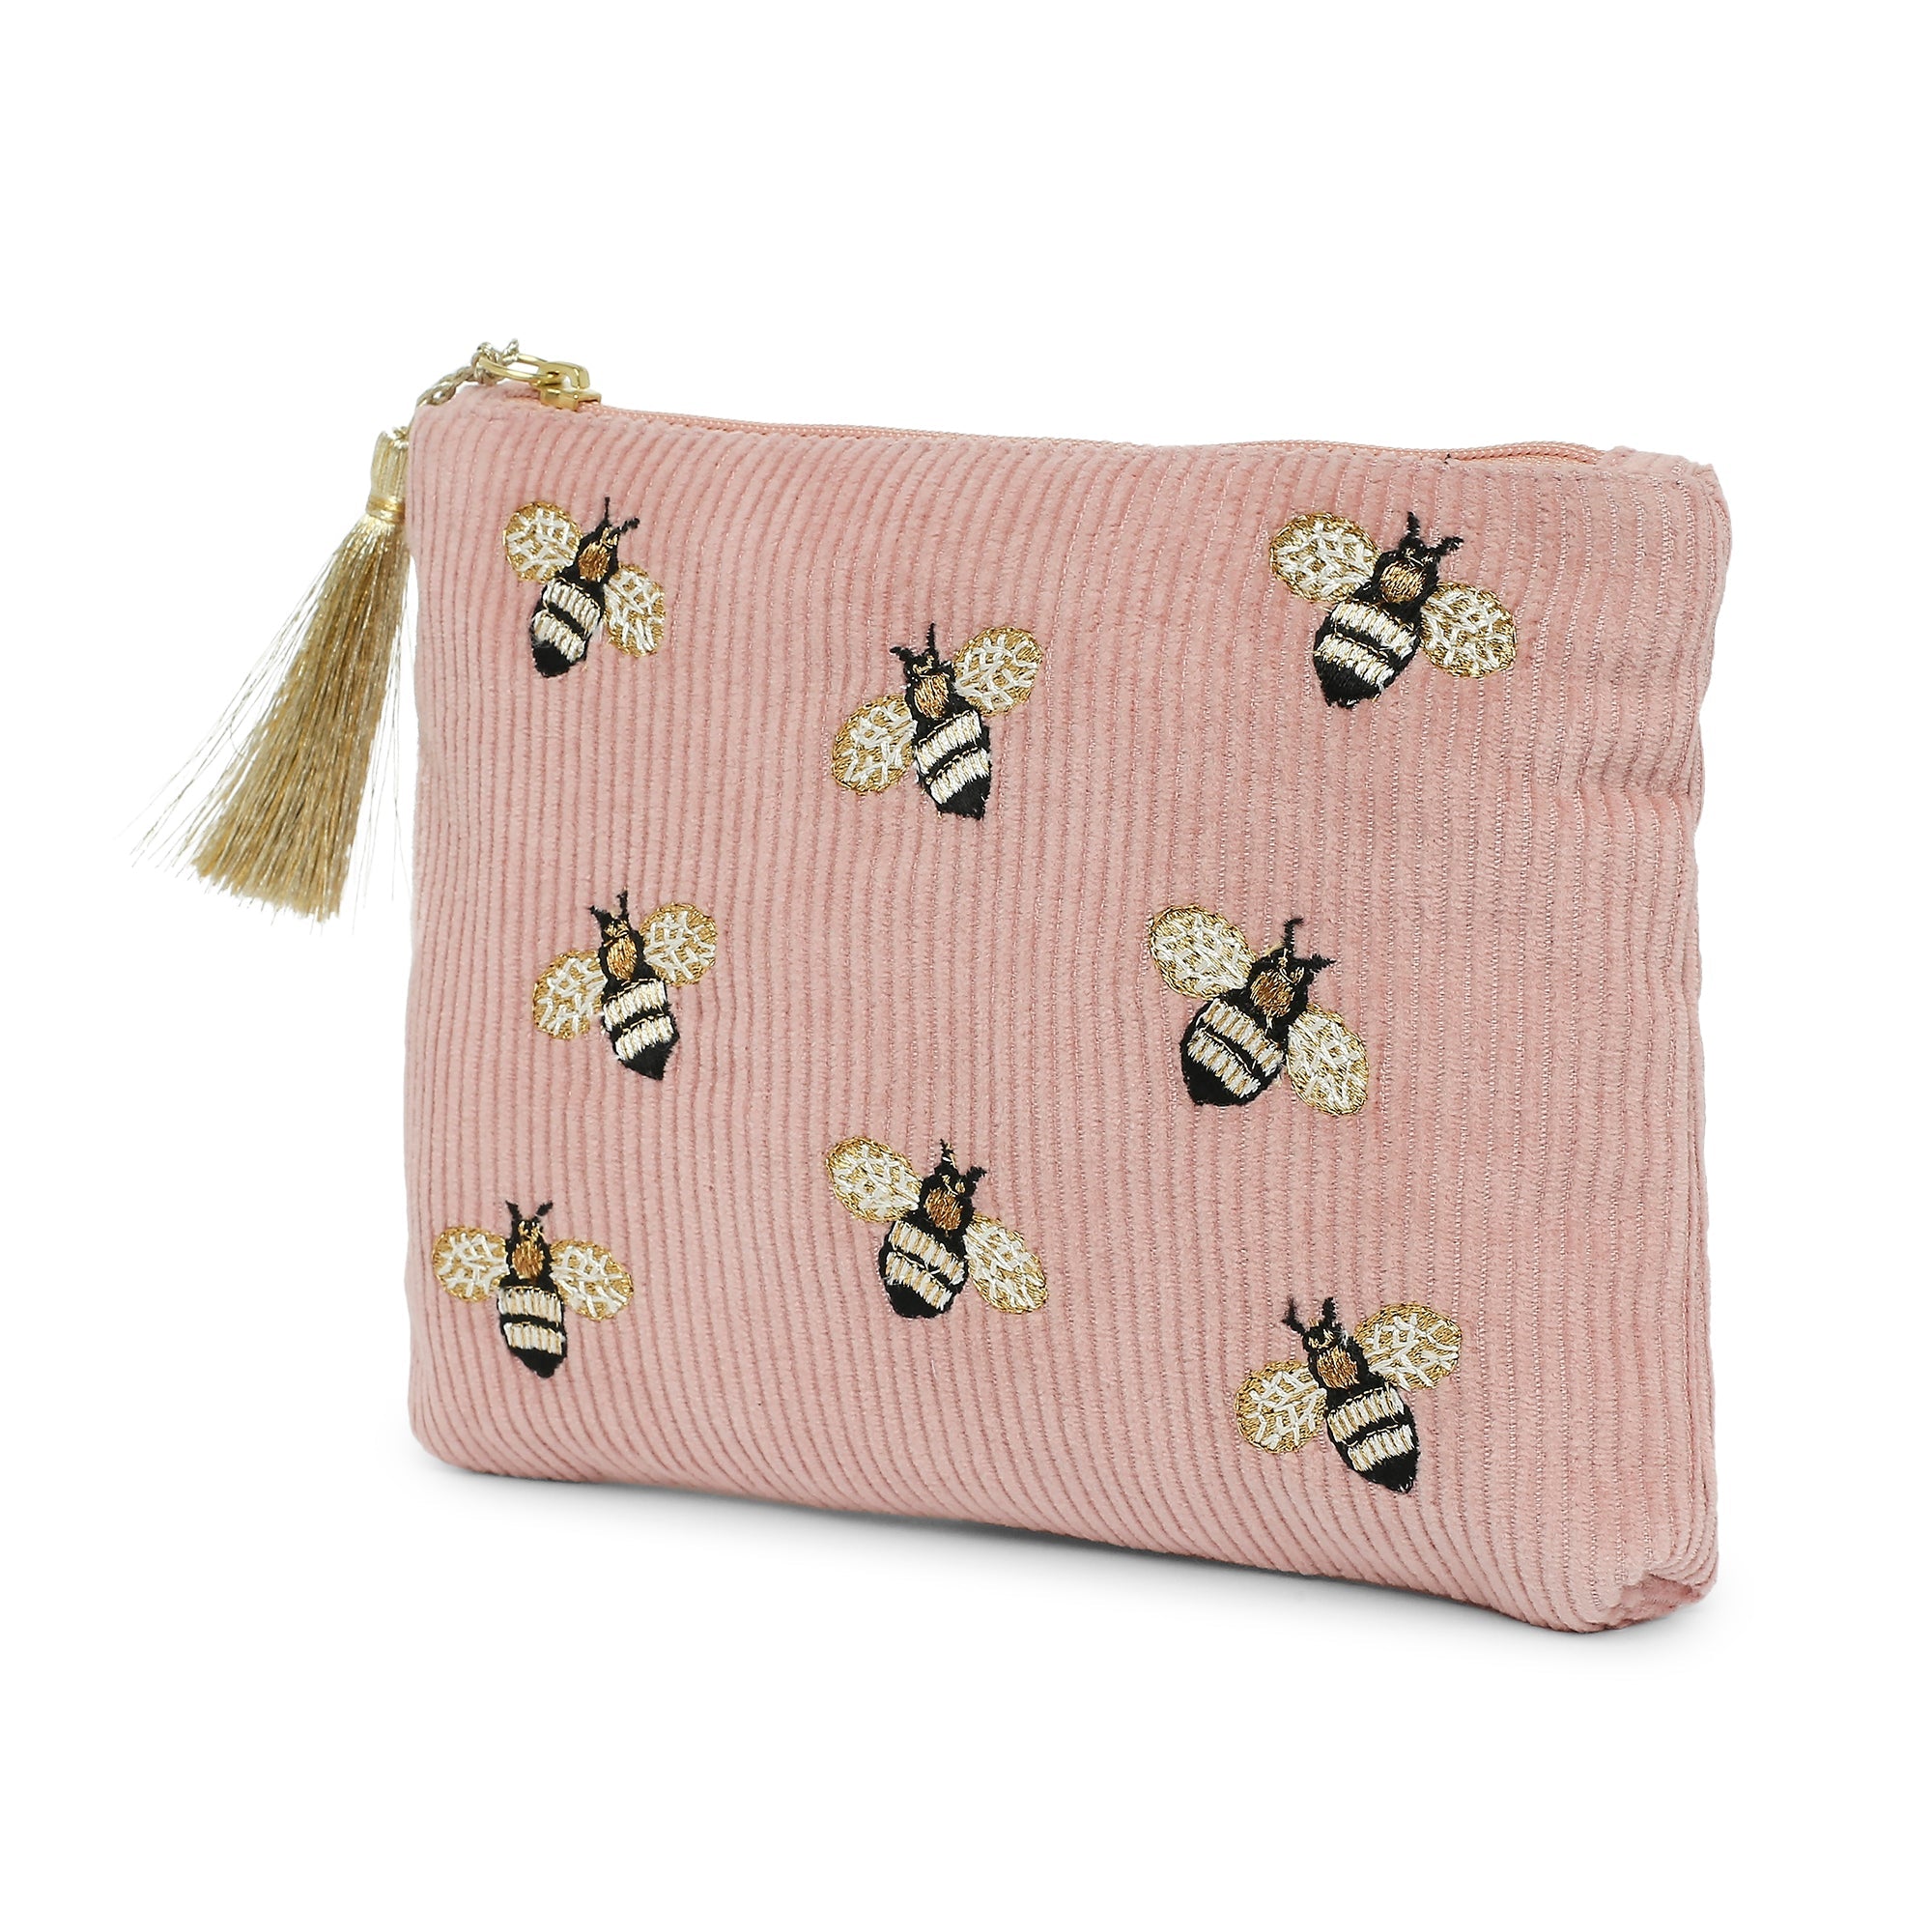 Accessorize London Women's Cotton Pink Bee Embellished Cosmetic Pouch